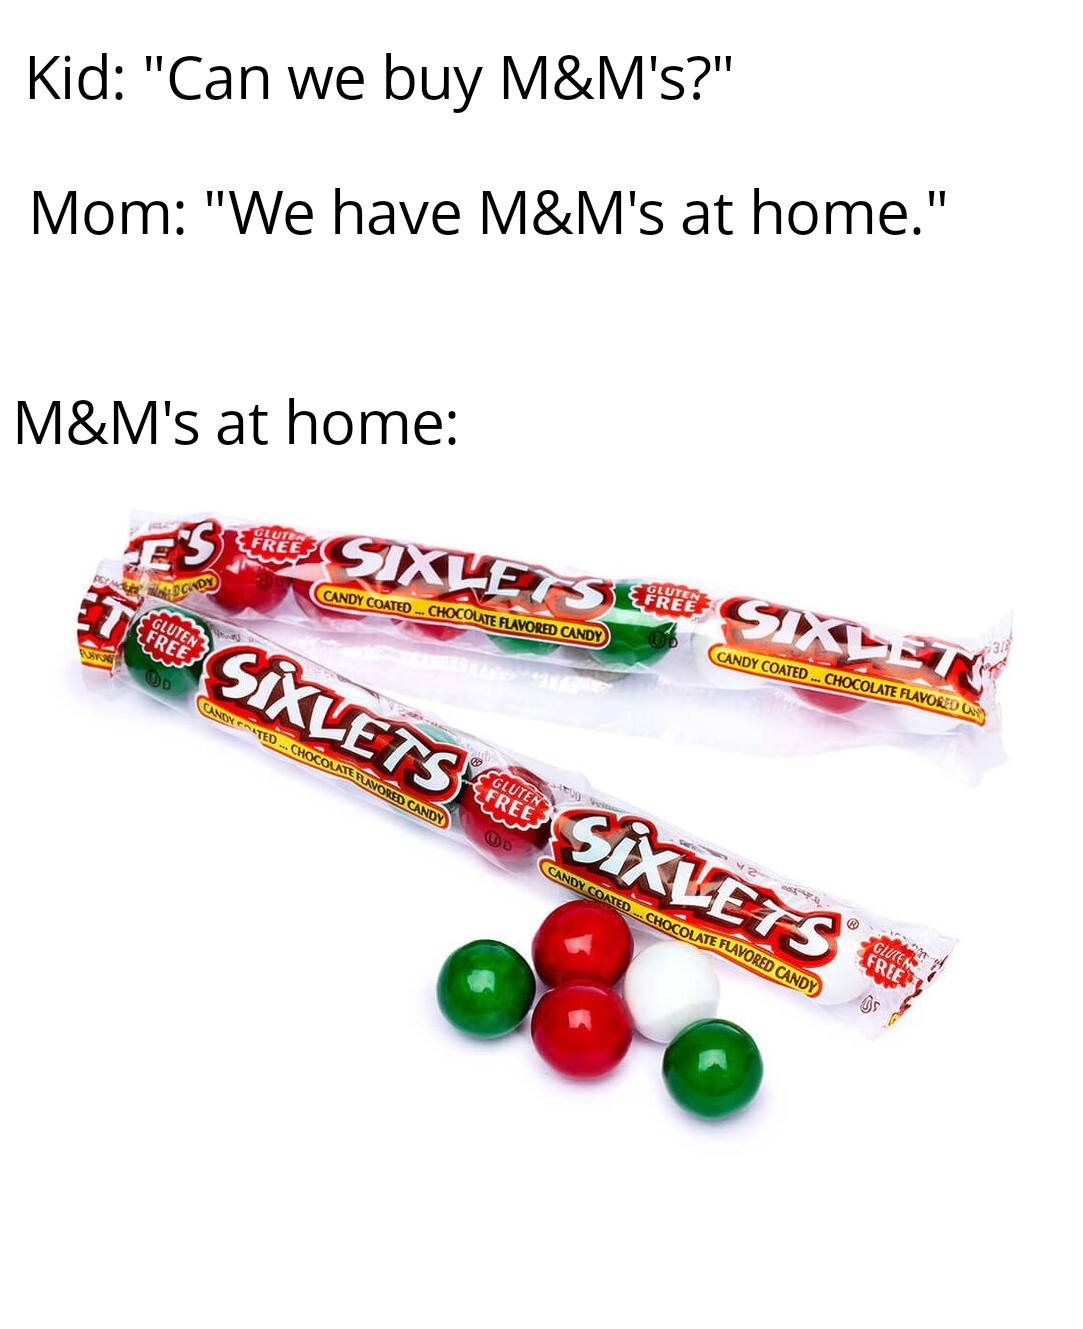 funny memes - sixlets candy - Kid "Can we buy M&M's?" Mom "We have M&M's at home." M&M's at home Fu E'S Pecady Putus Gluten Free w The Sixlets Sixlet Candy Coated... Chocolate Flavored Candy Sixlets Sixlets Candy Coated... Chocolate Flavored Candy Candy C